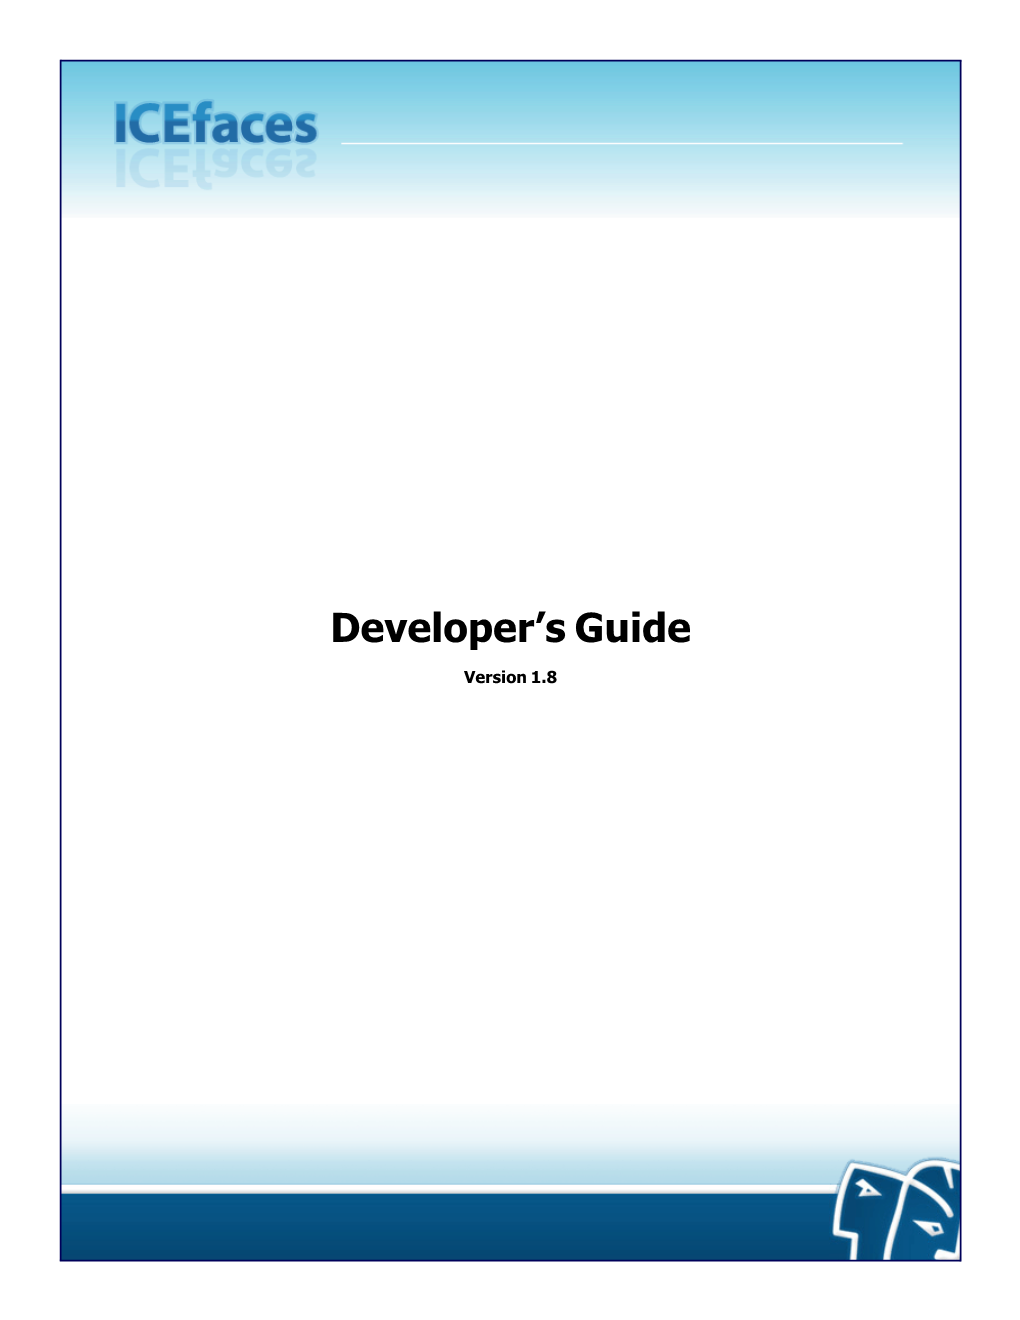 Icefaces Developer's Guide